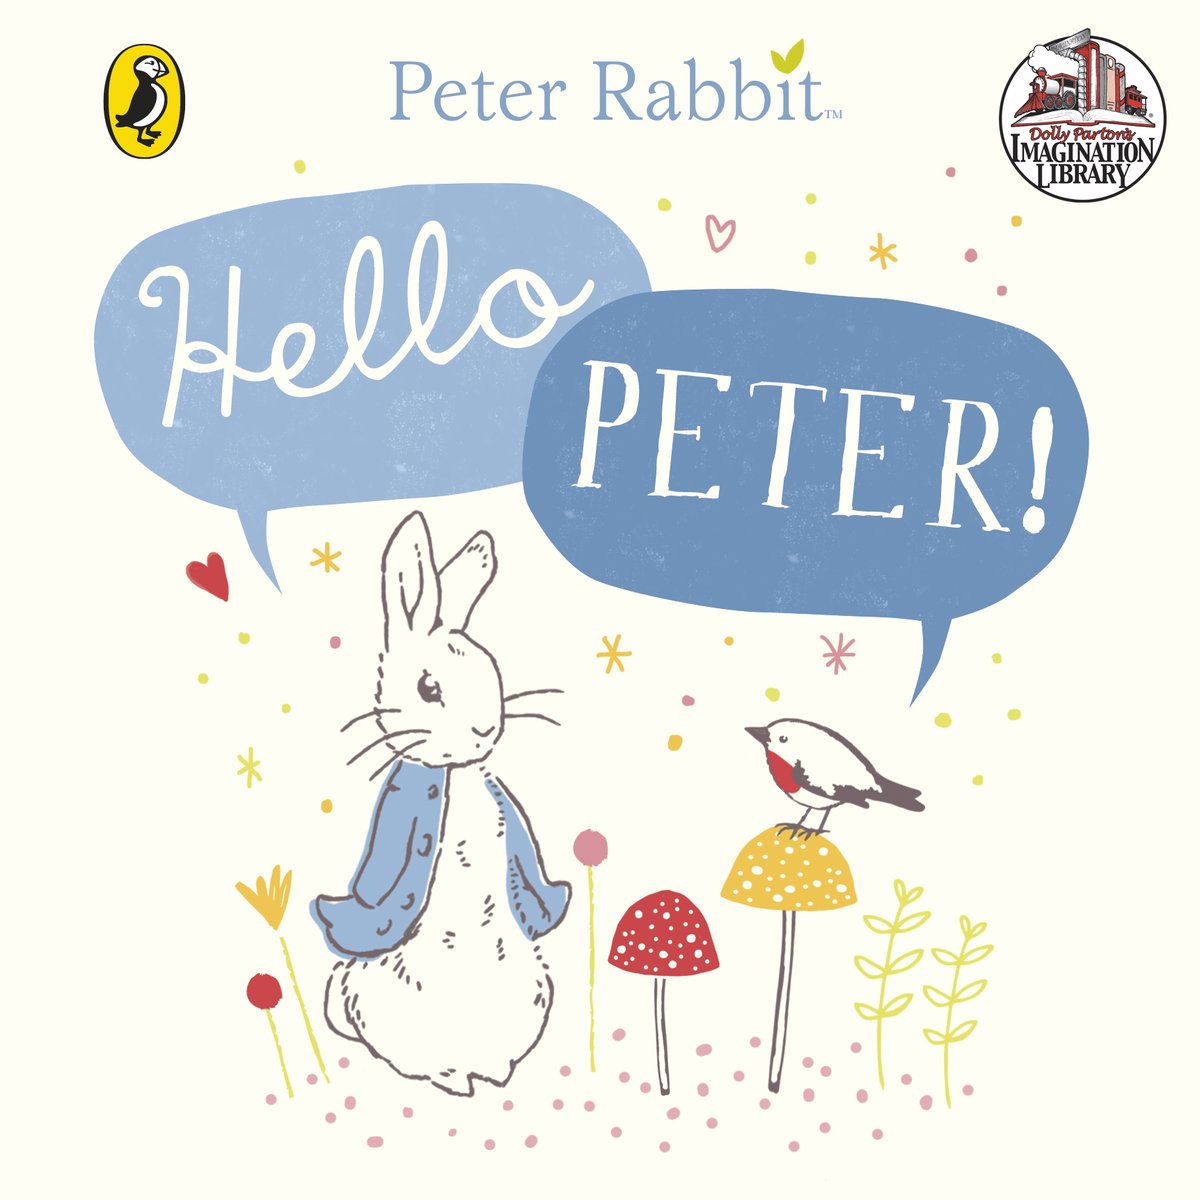 Dive into the enchanting world of Beatrix Potter with her timeless illustrations and soothing rhymes, creating the ideal bedtime companion for little ones. Let Peter Rabbit's mischievous escapades lull them into sweet dreams. #DollysLibrary #UKBook #IrelandBook